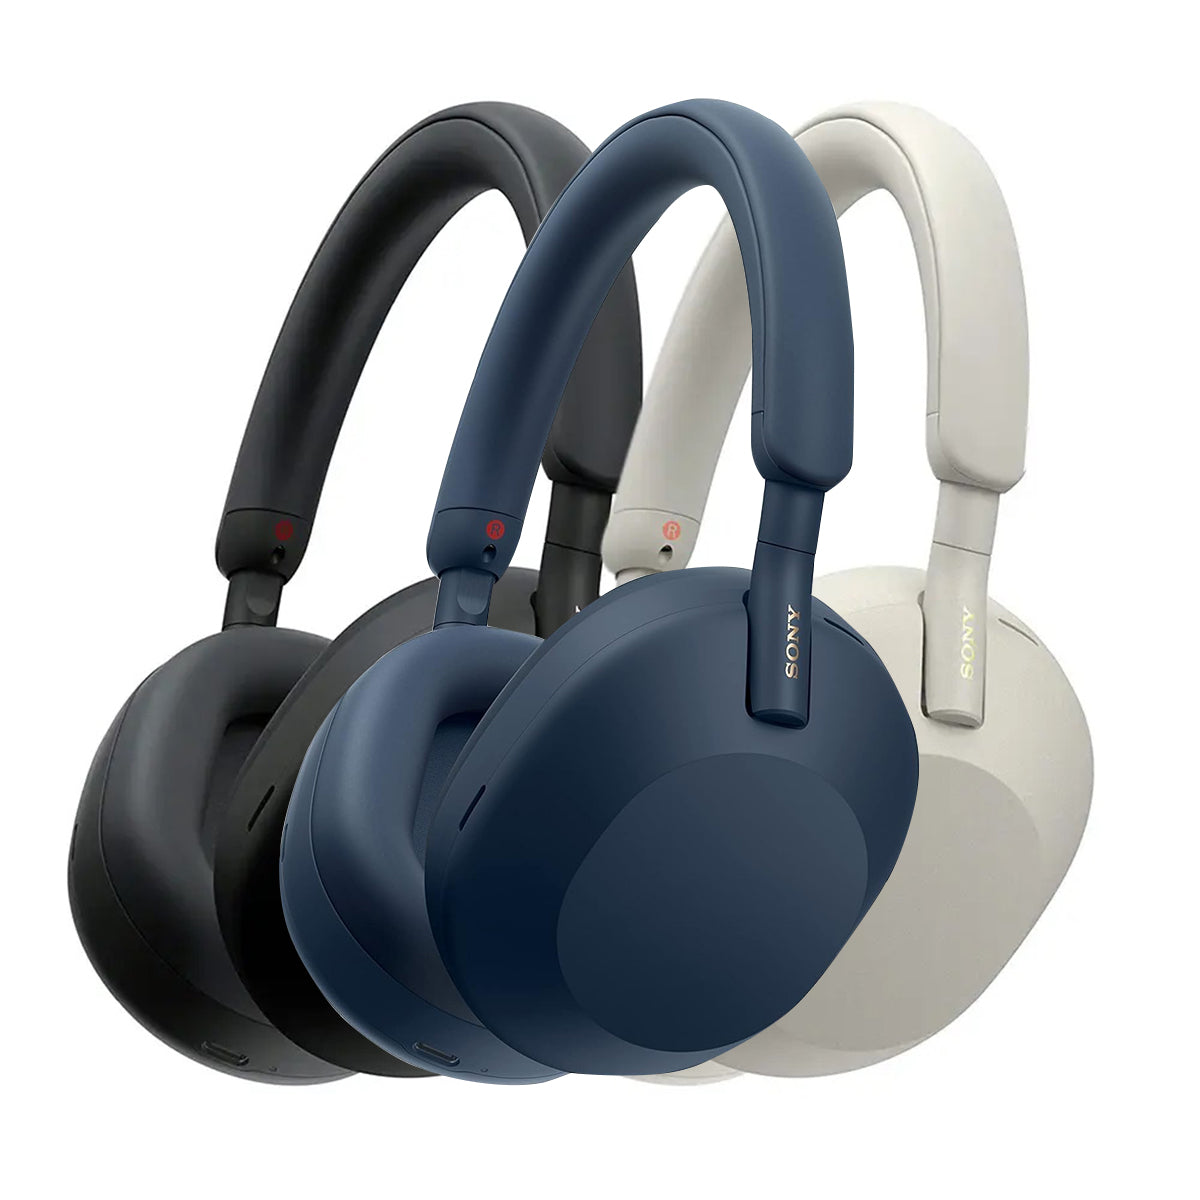 Sony WH-1000XM5 Wireless Over-ear Industry Leading Noise Canceling Headphones with Microphone